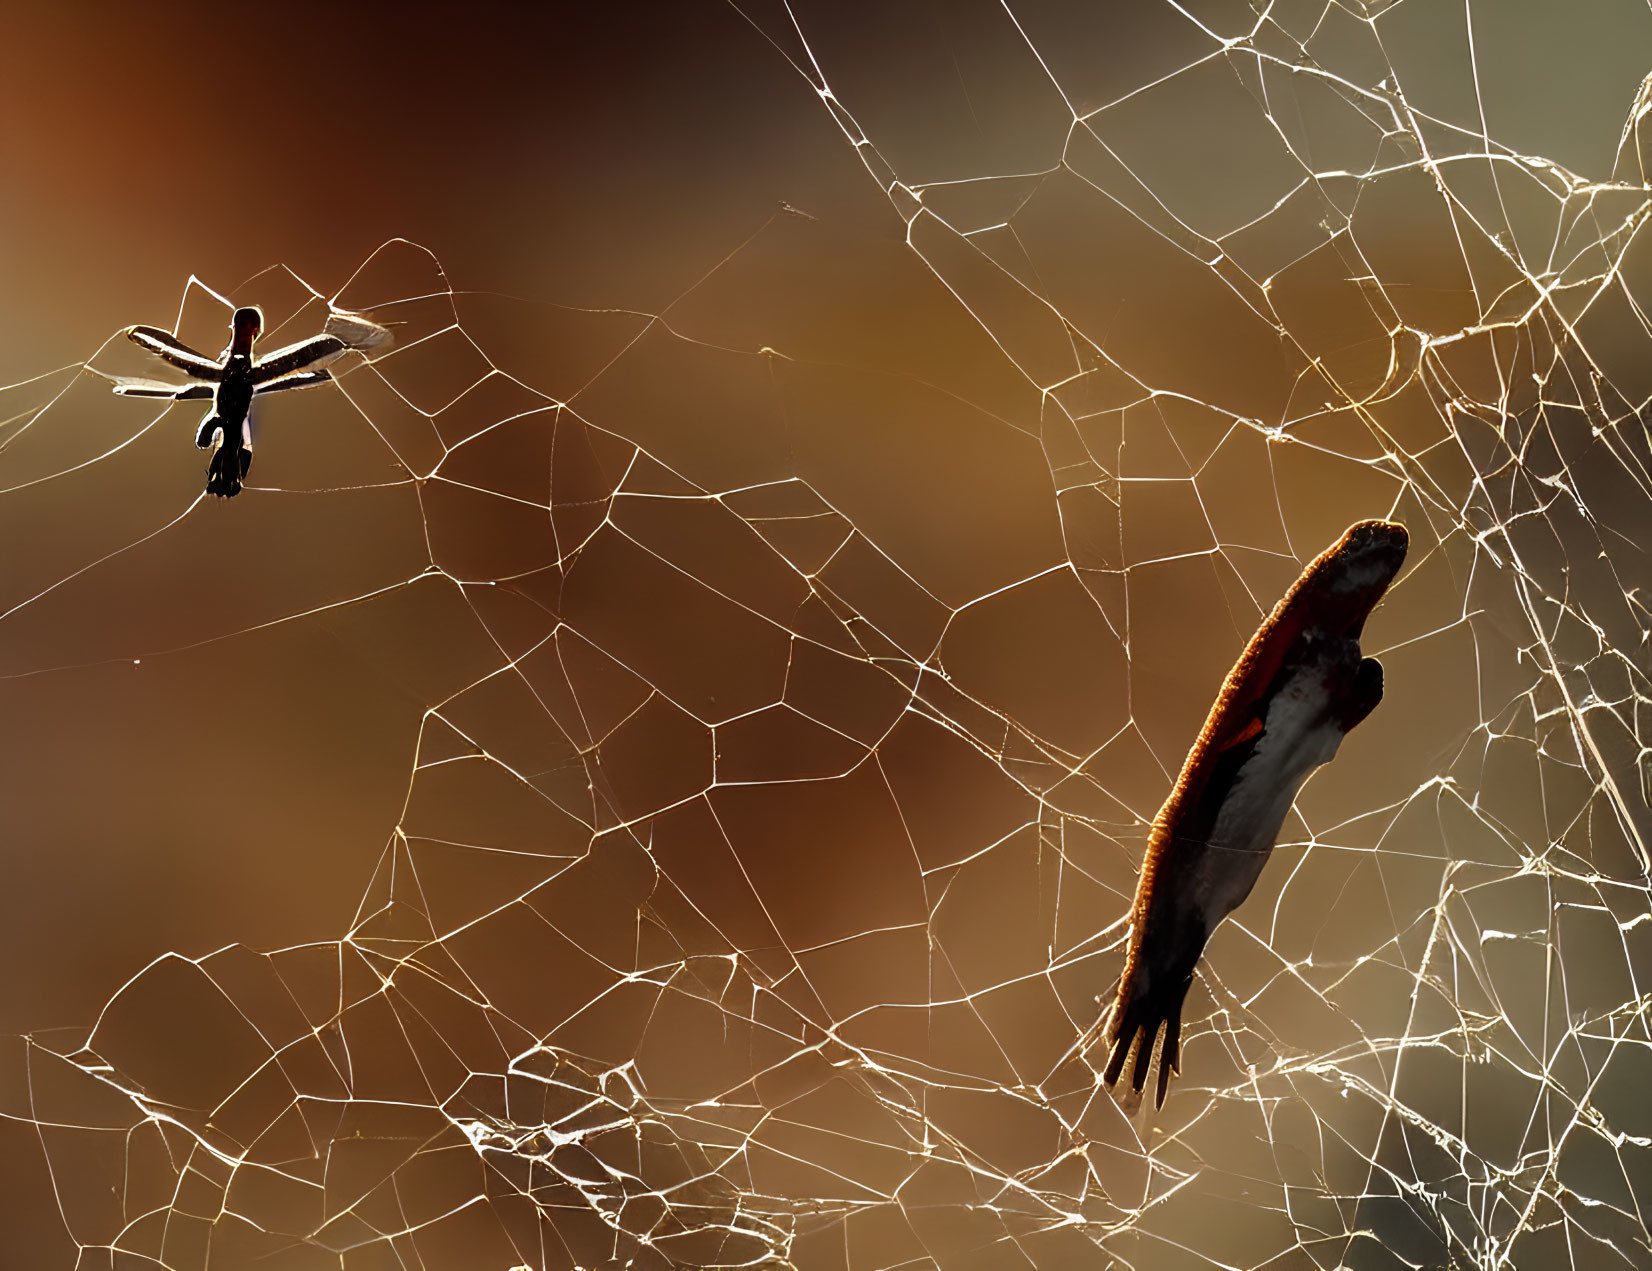 Drone caught in spider's web at sunset with false silhouette of approaching spider.